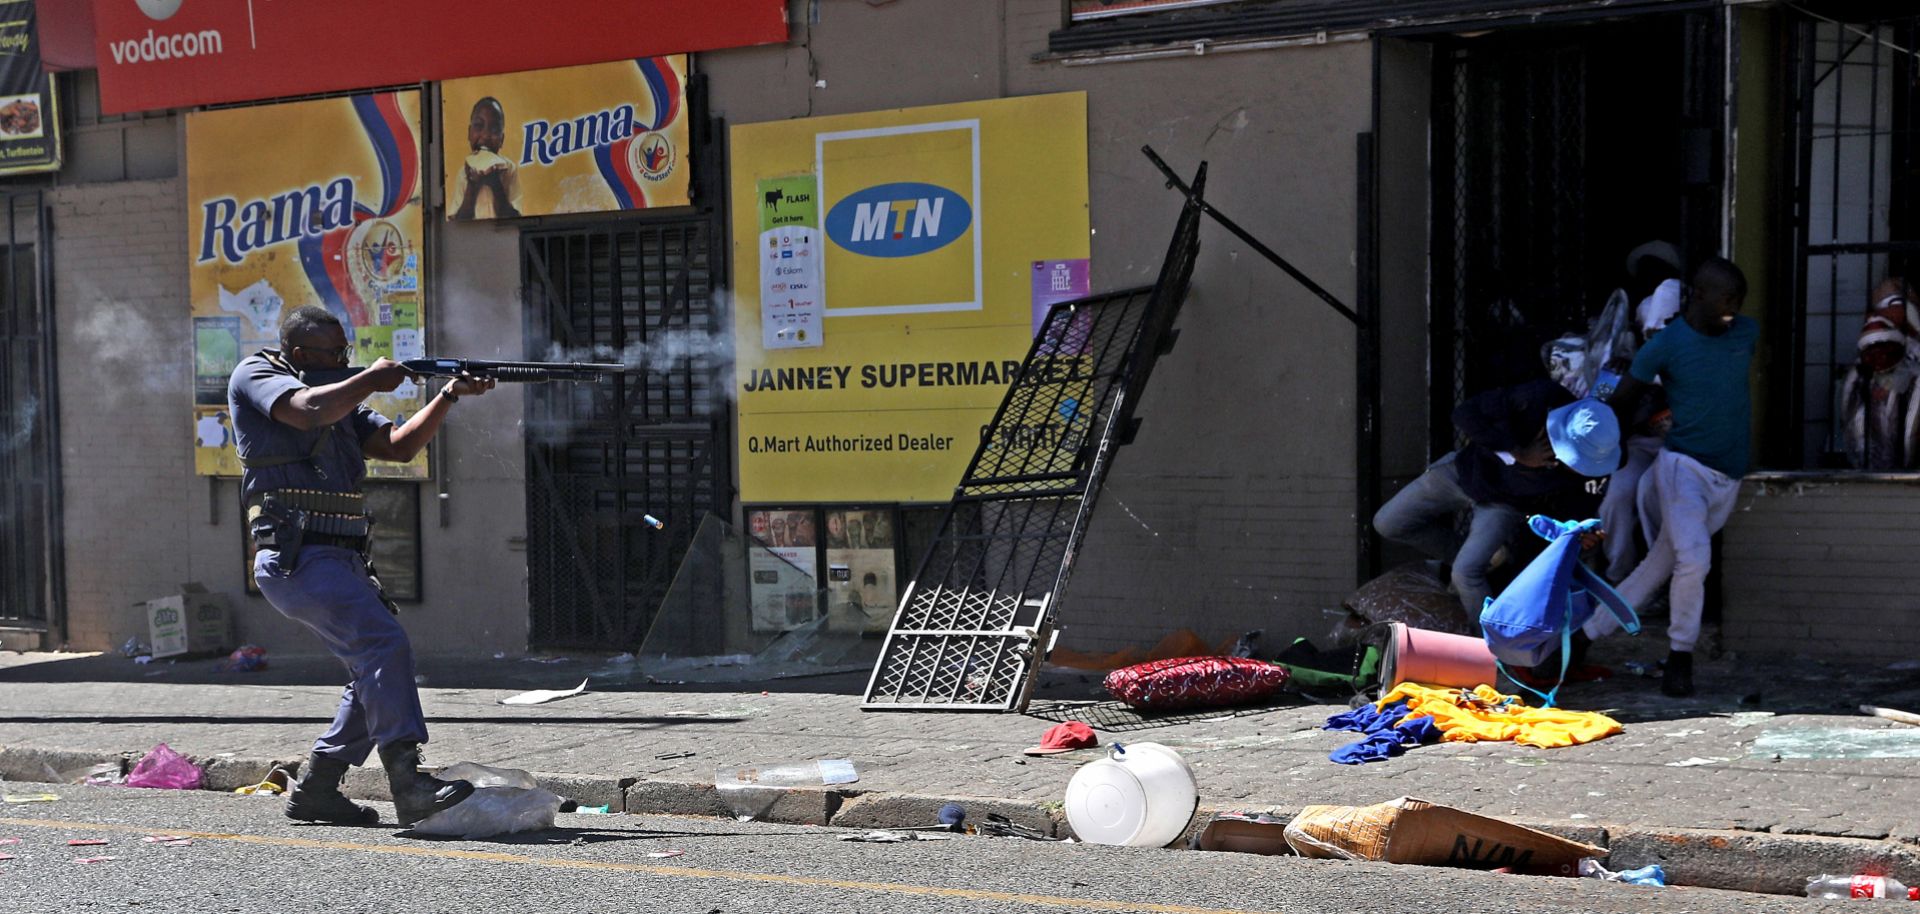 South African law enforcement officers clash with looters during xenophobic violence and looting on Sept. 2, 2019, in Johannesburg.